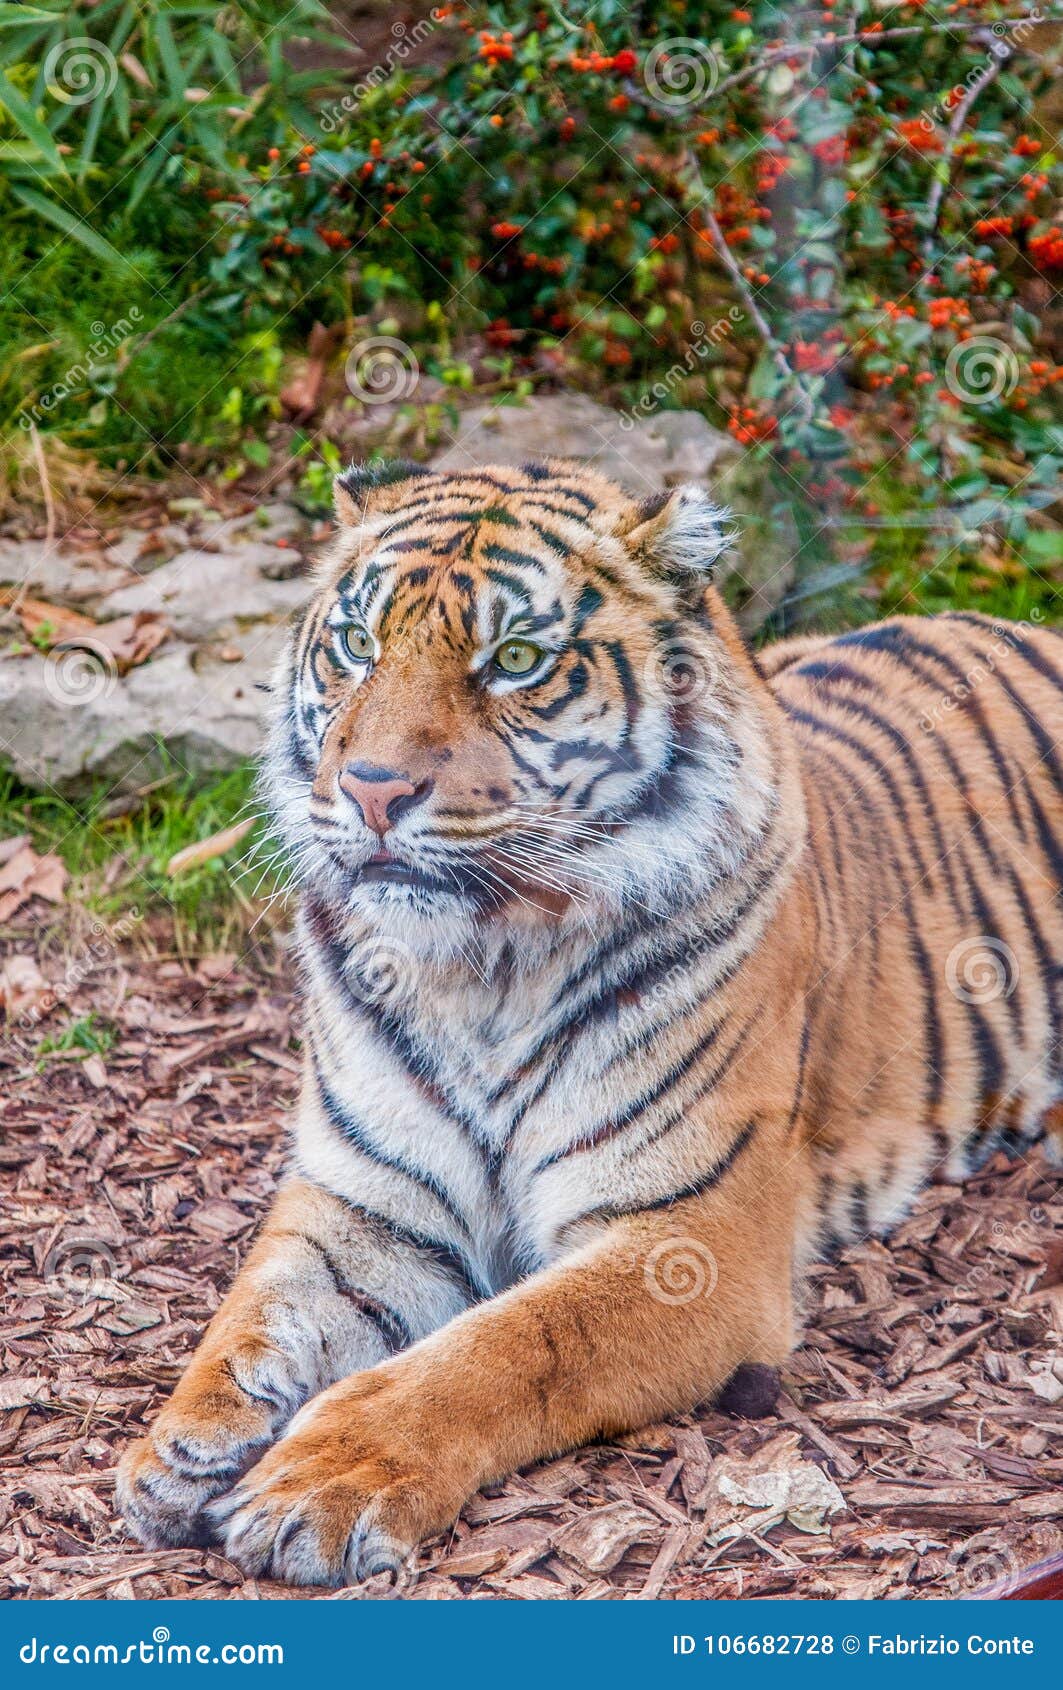 Bengal Tiger Queen Of Forest Tiger Mask Stock Photo Image Of Woods Eyes